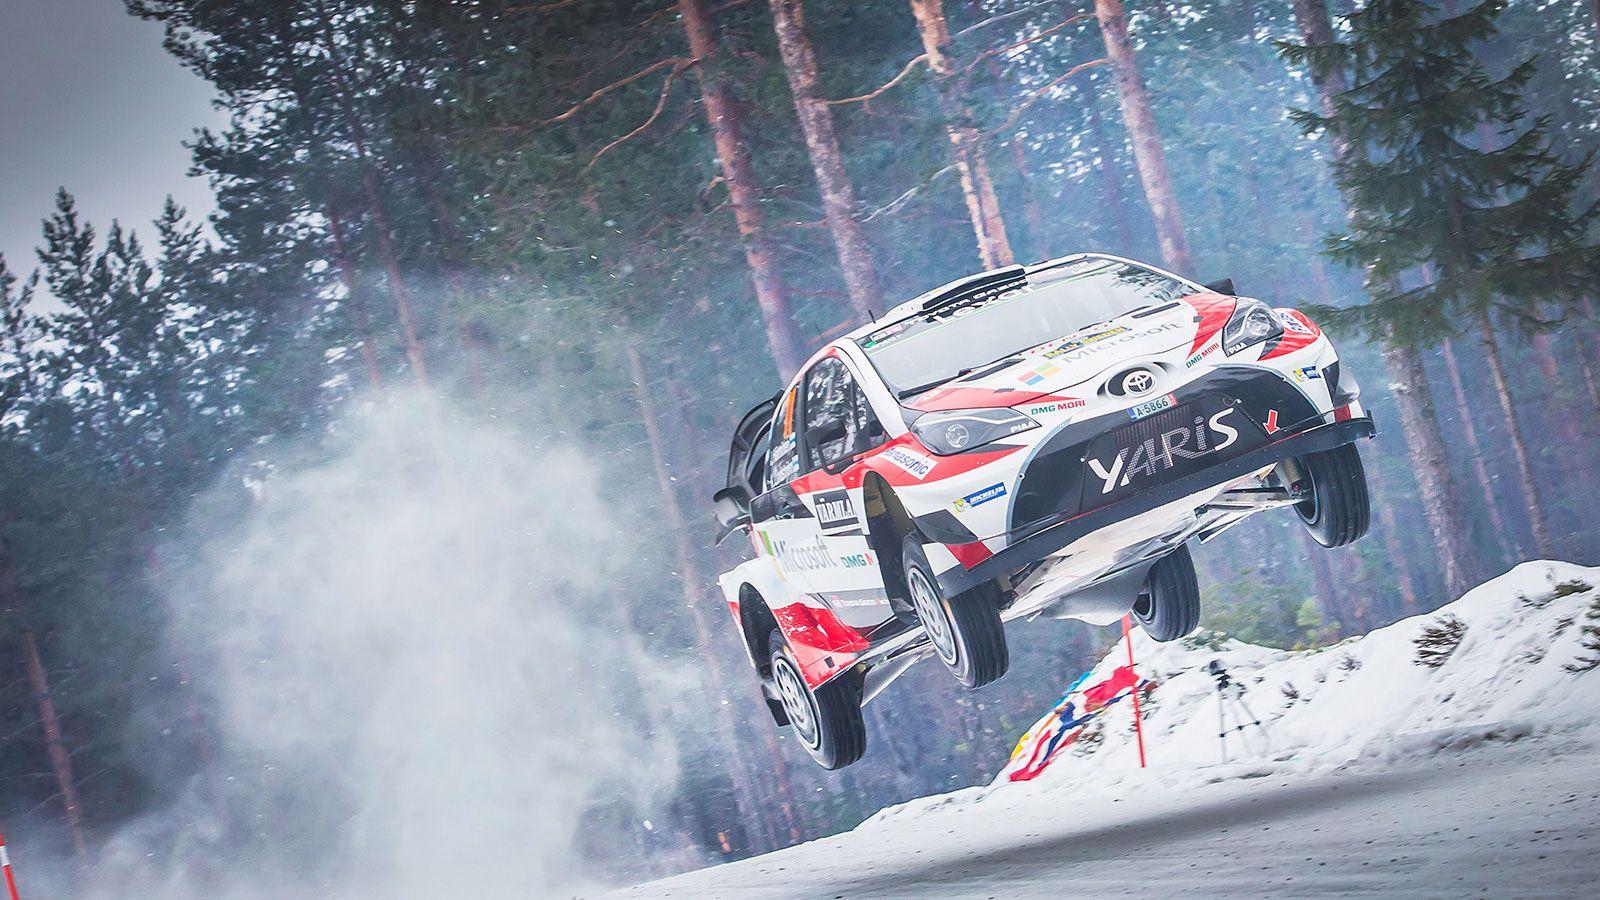 Toyota Wrc Wallpapers Top Free Toyota Wrc Backgrounds Wallpaperaccess